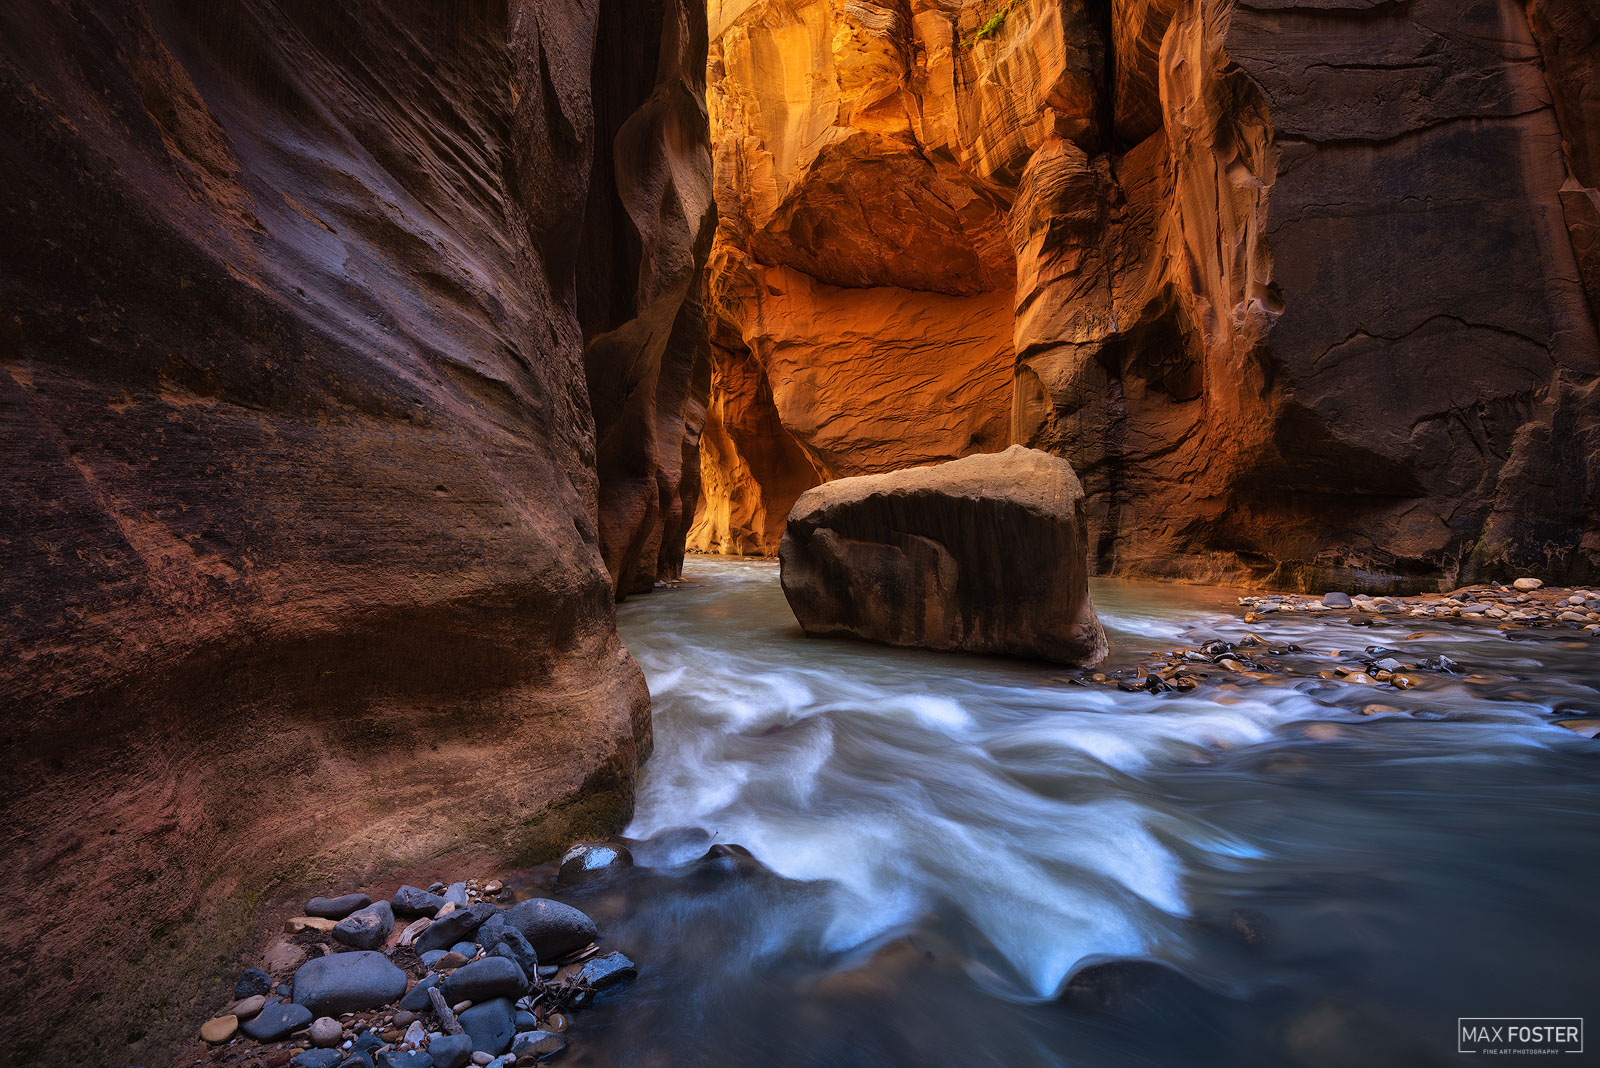 Bring your walls to life with Rock of Ages, Max Foster's limited edition photography print of The Narrows in Zion National Park...